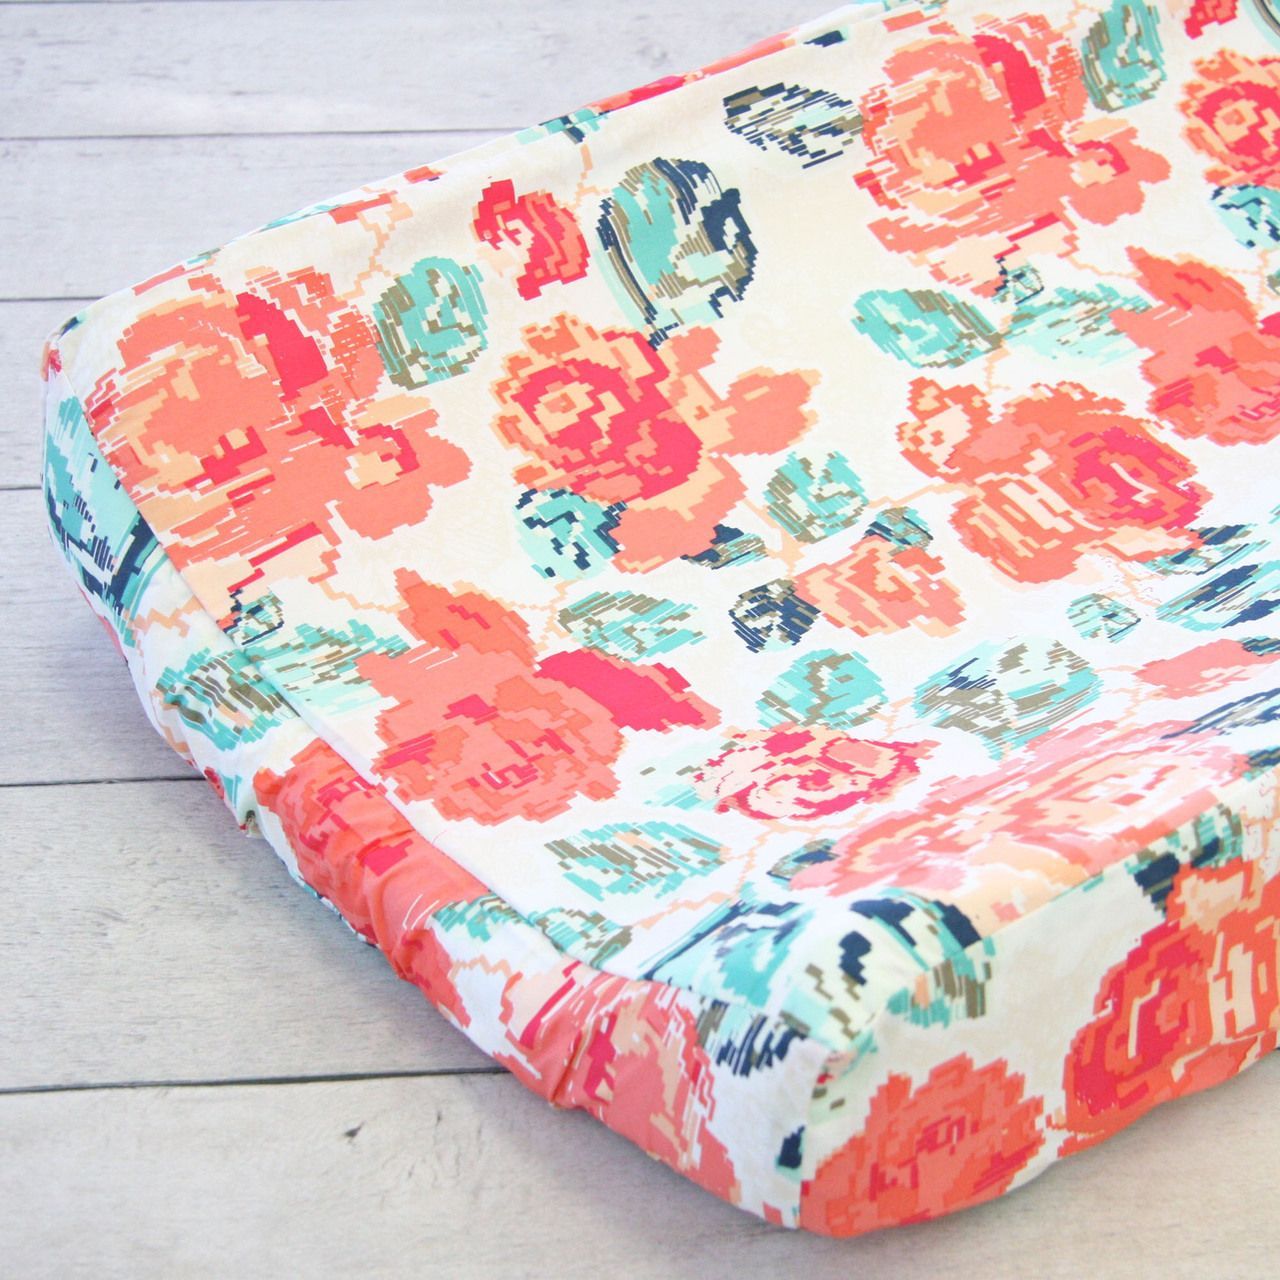 This floral changing pad cover from Caden Lane is the perfect color combination of coral and navy. This changing pad cover stand